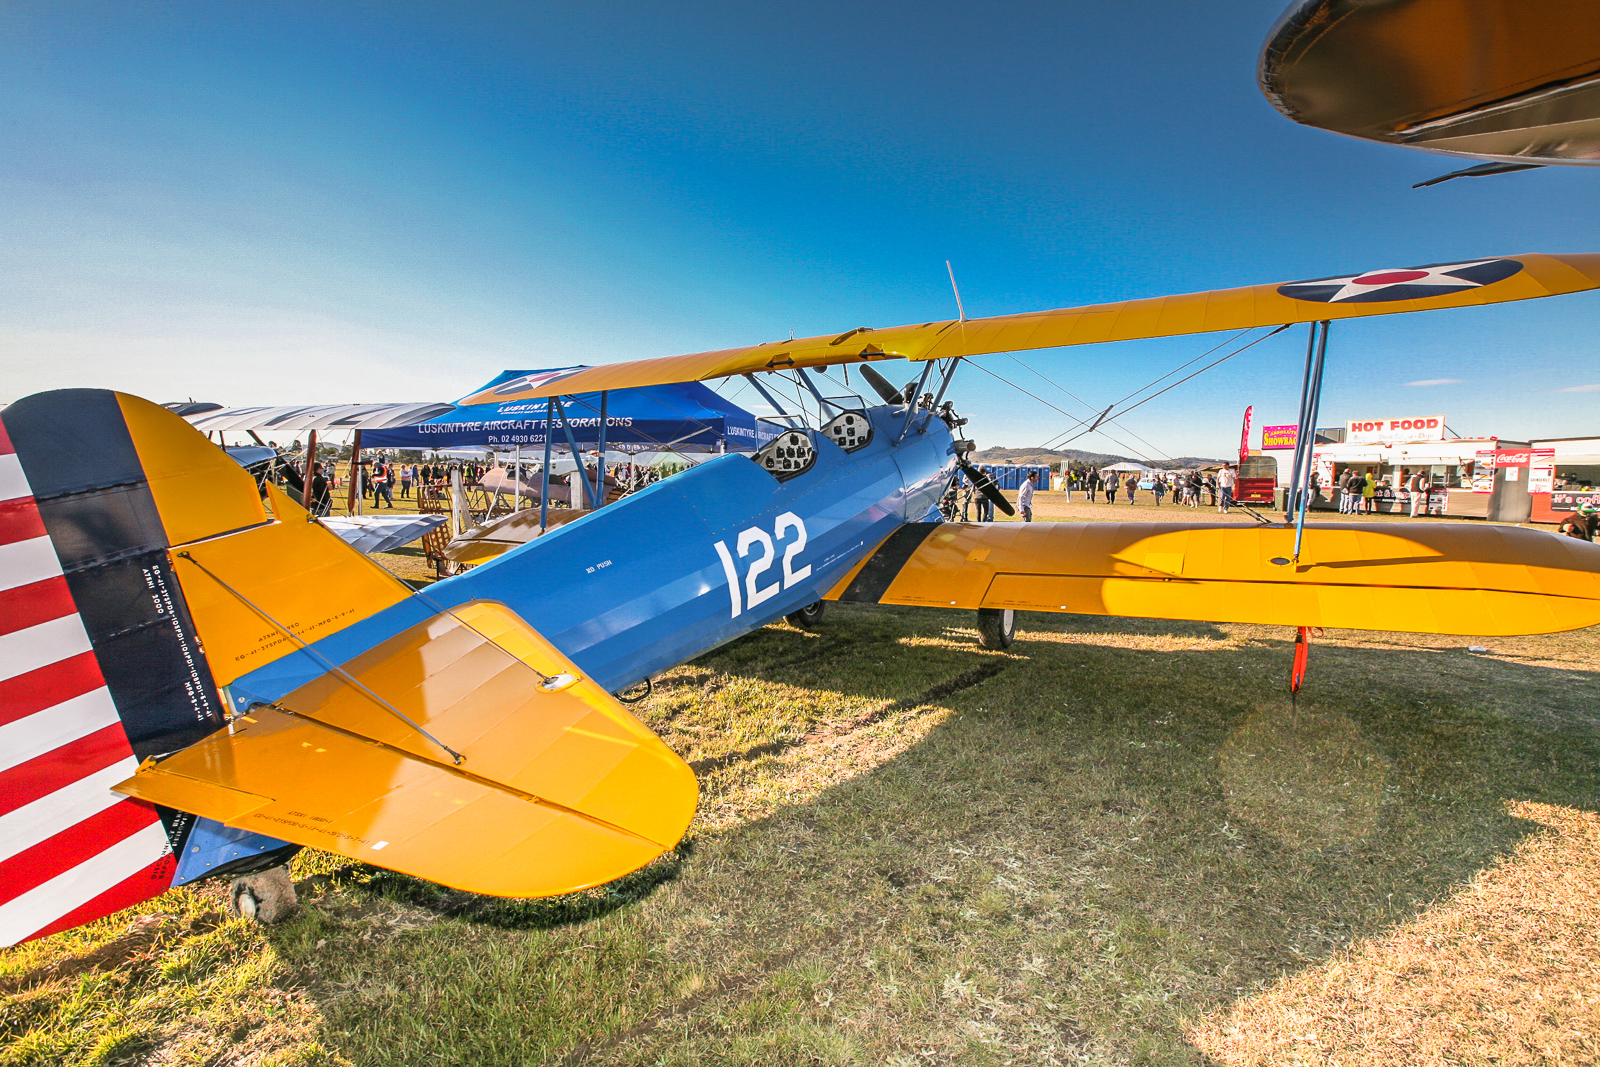 One of several WWII-era biplane trainers on display at Maitland. (photo by Phil Buckley) 